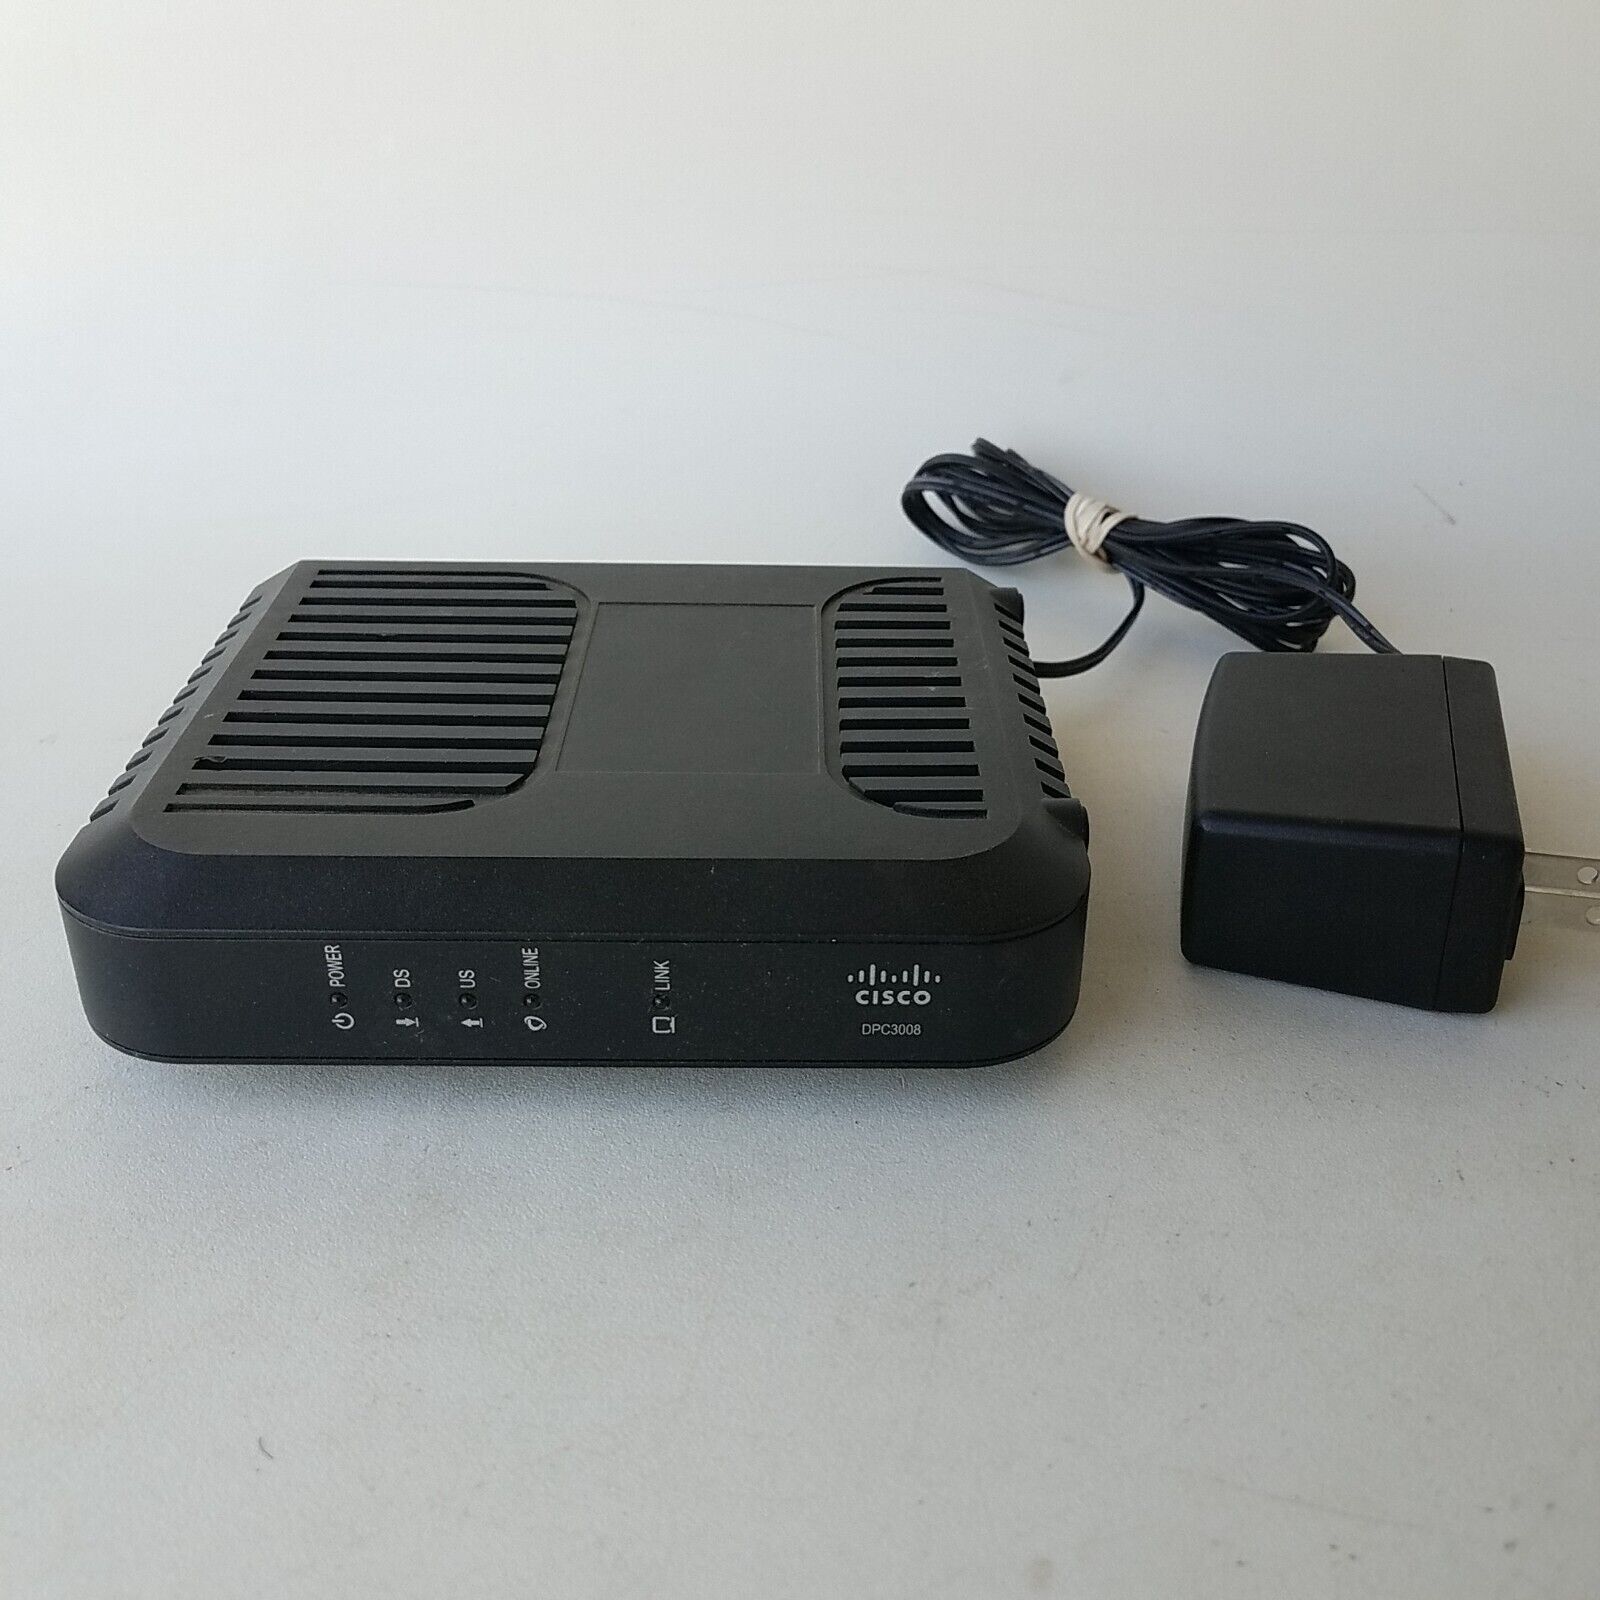 Cisco Model DPC3008 DOCSIS 3.0 Cable Modem With Power Supply